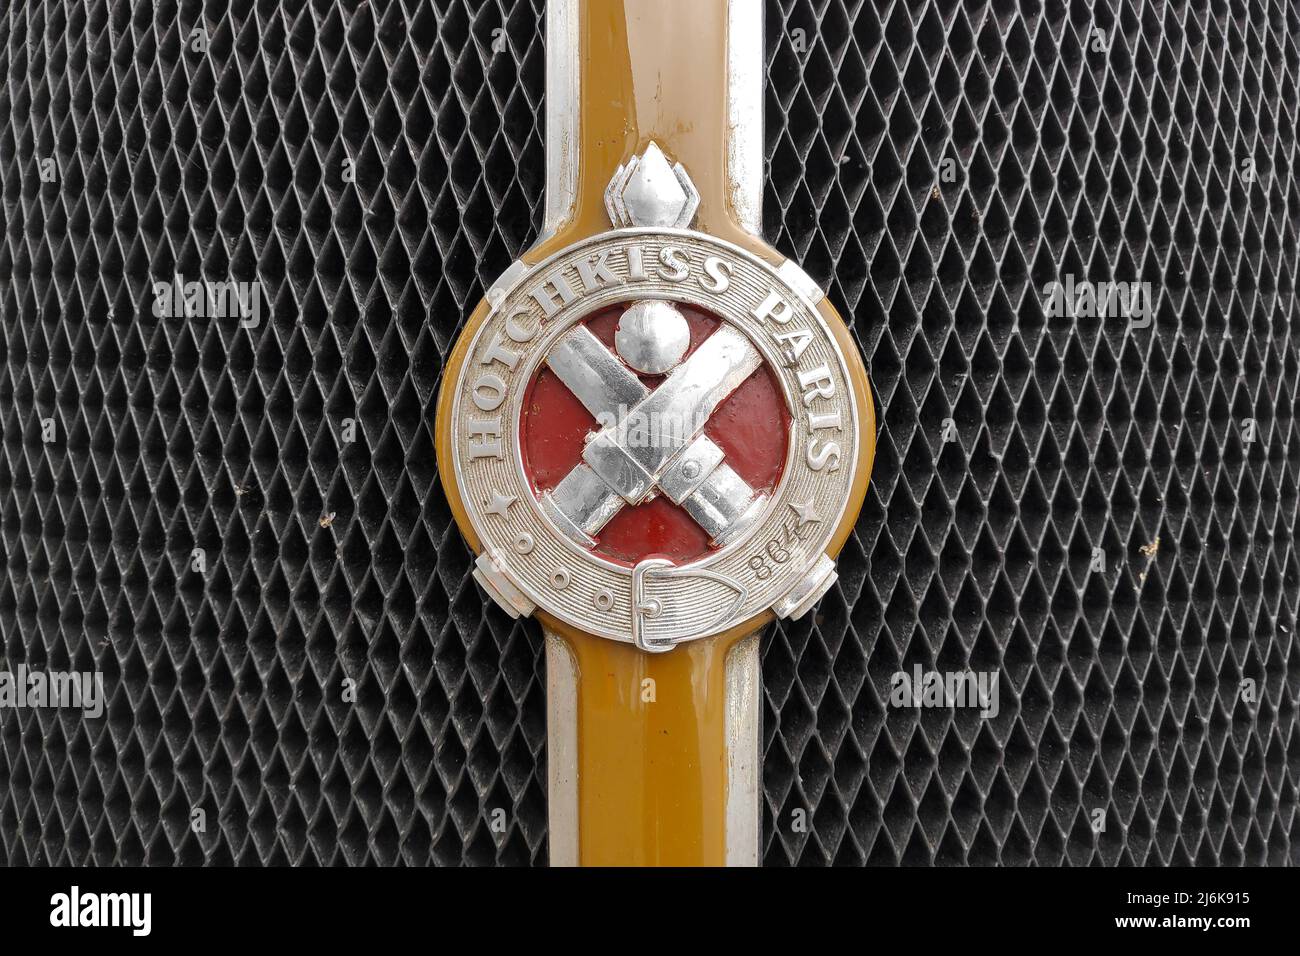 Pleyber Christ, France - May 02 2022: Emblem of a Hotchkiss Artois, a luxury car produced between 1948 and 1950 by the French automobile manufacturer Stock Photo